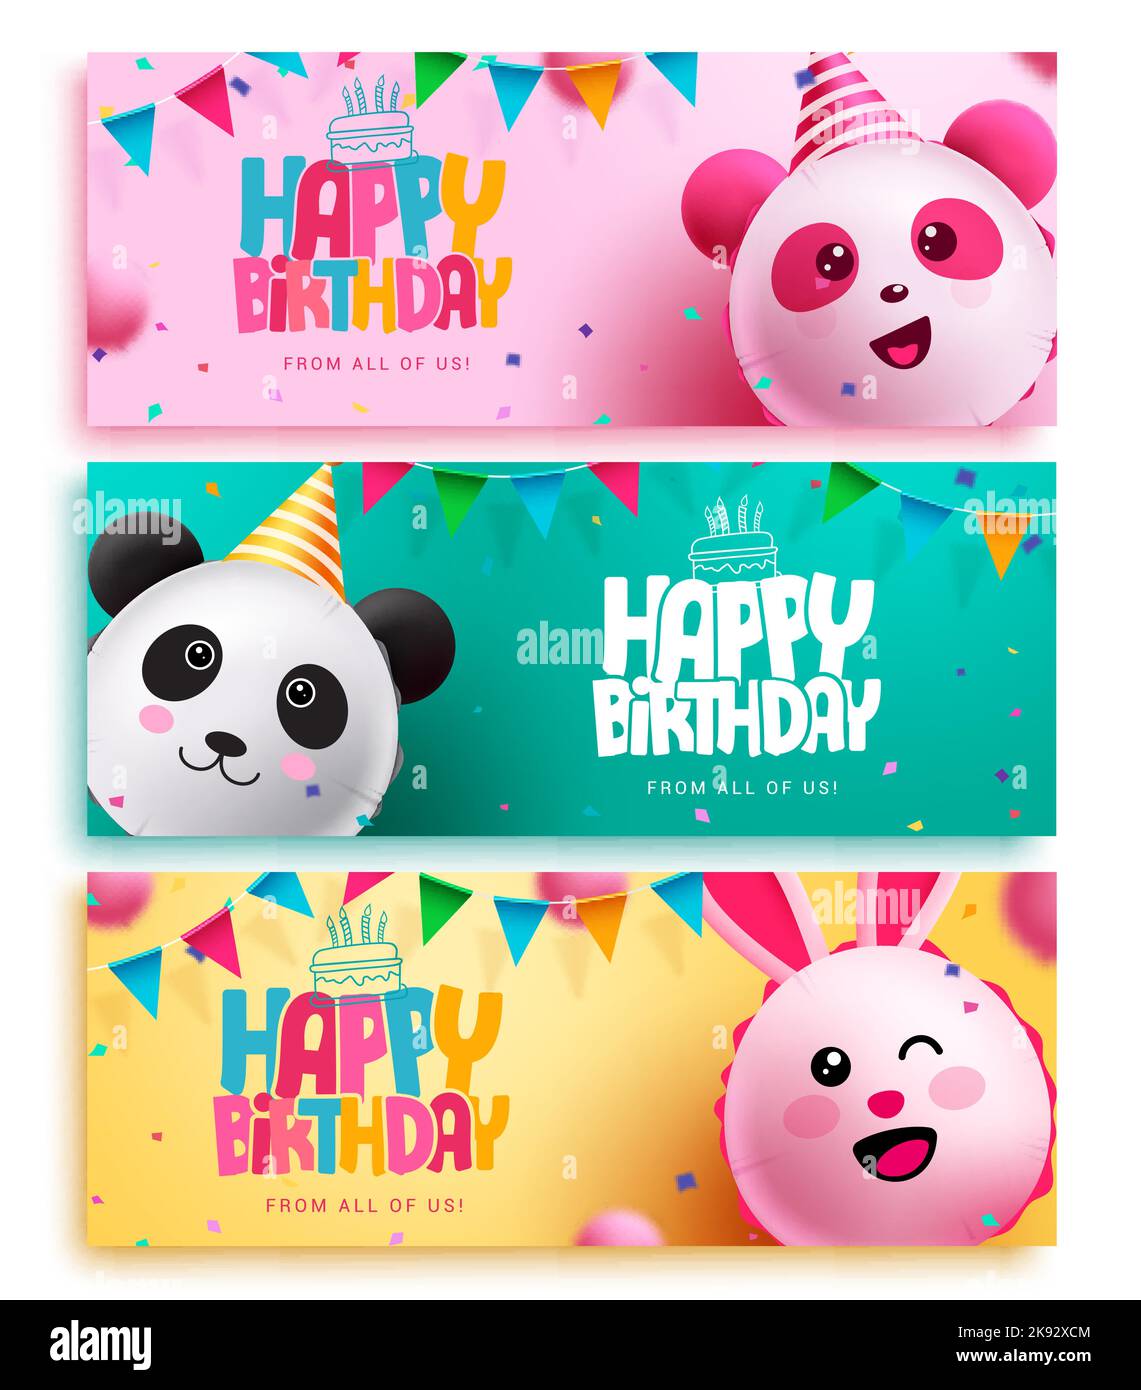 Happy birthday text vector banner set design. Birthday greeting card with inflatable character balloons for party lay out background decoration. Stock Vector